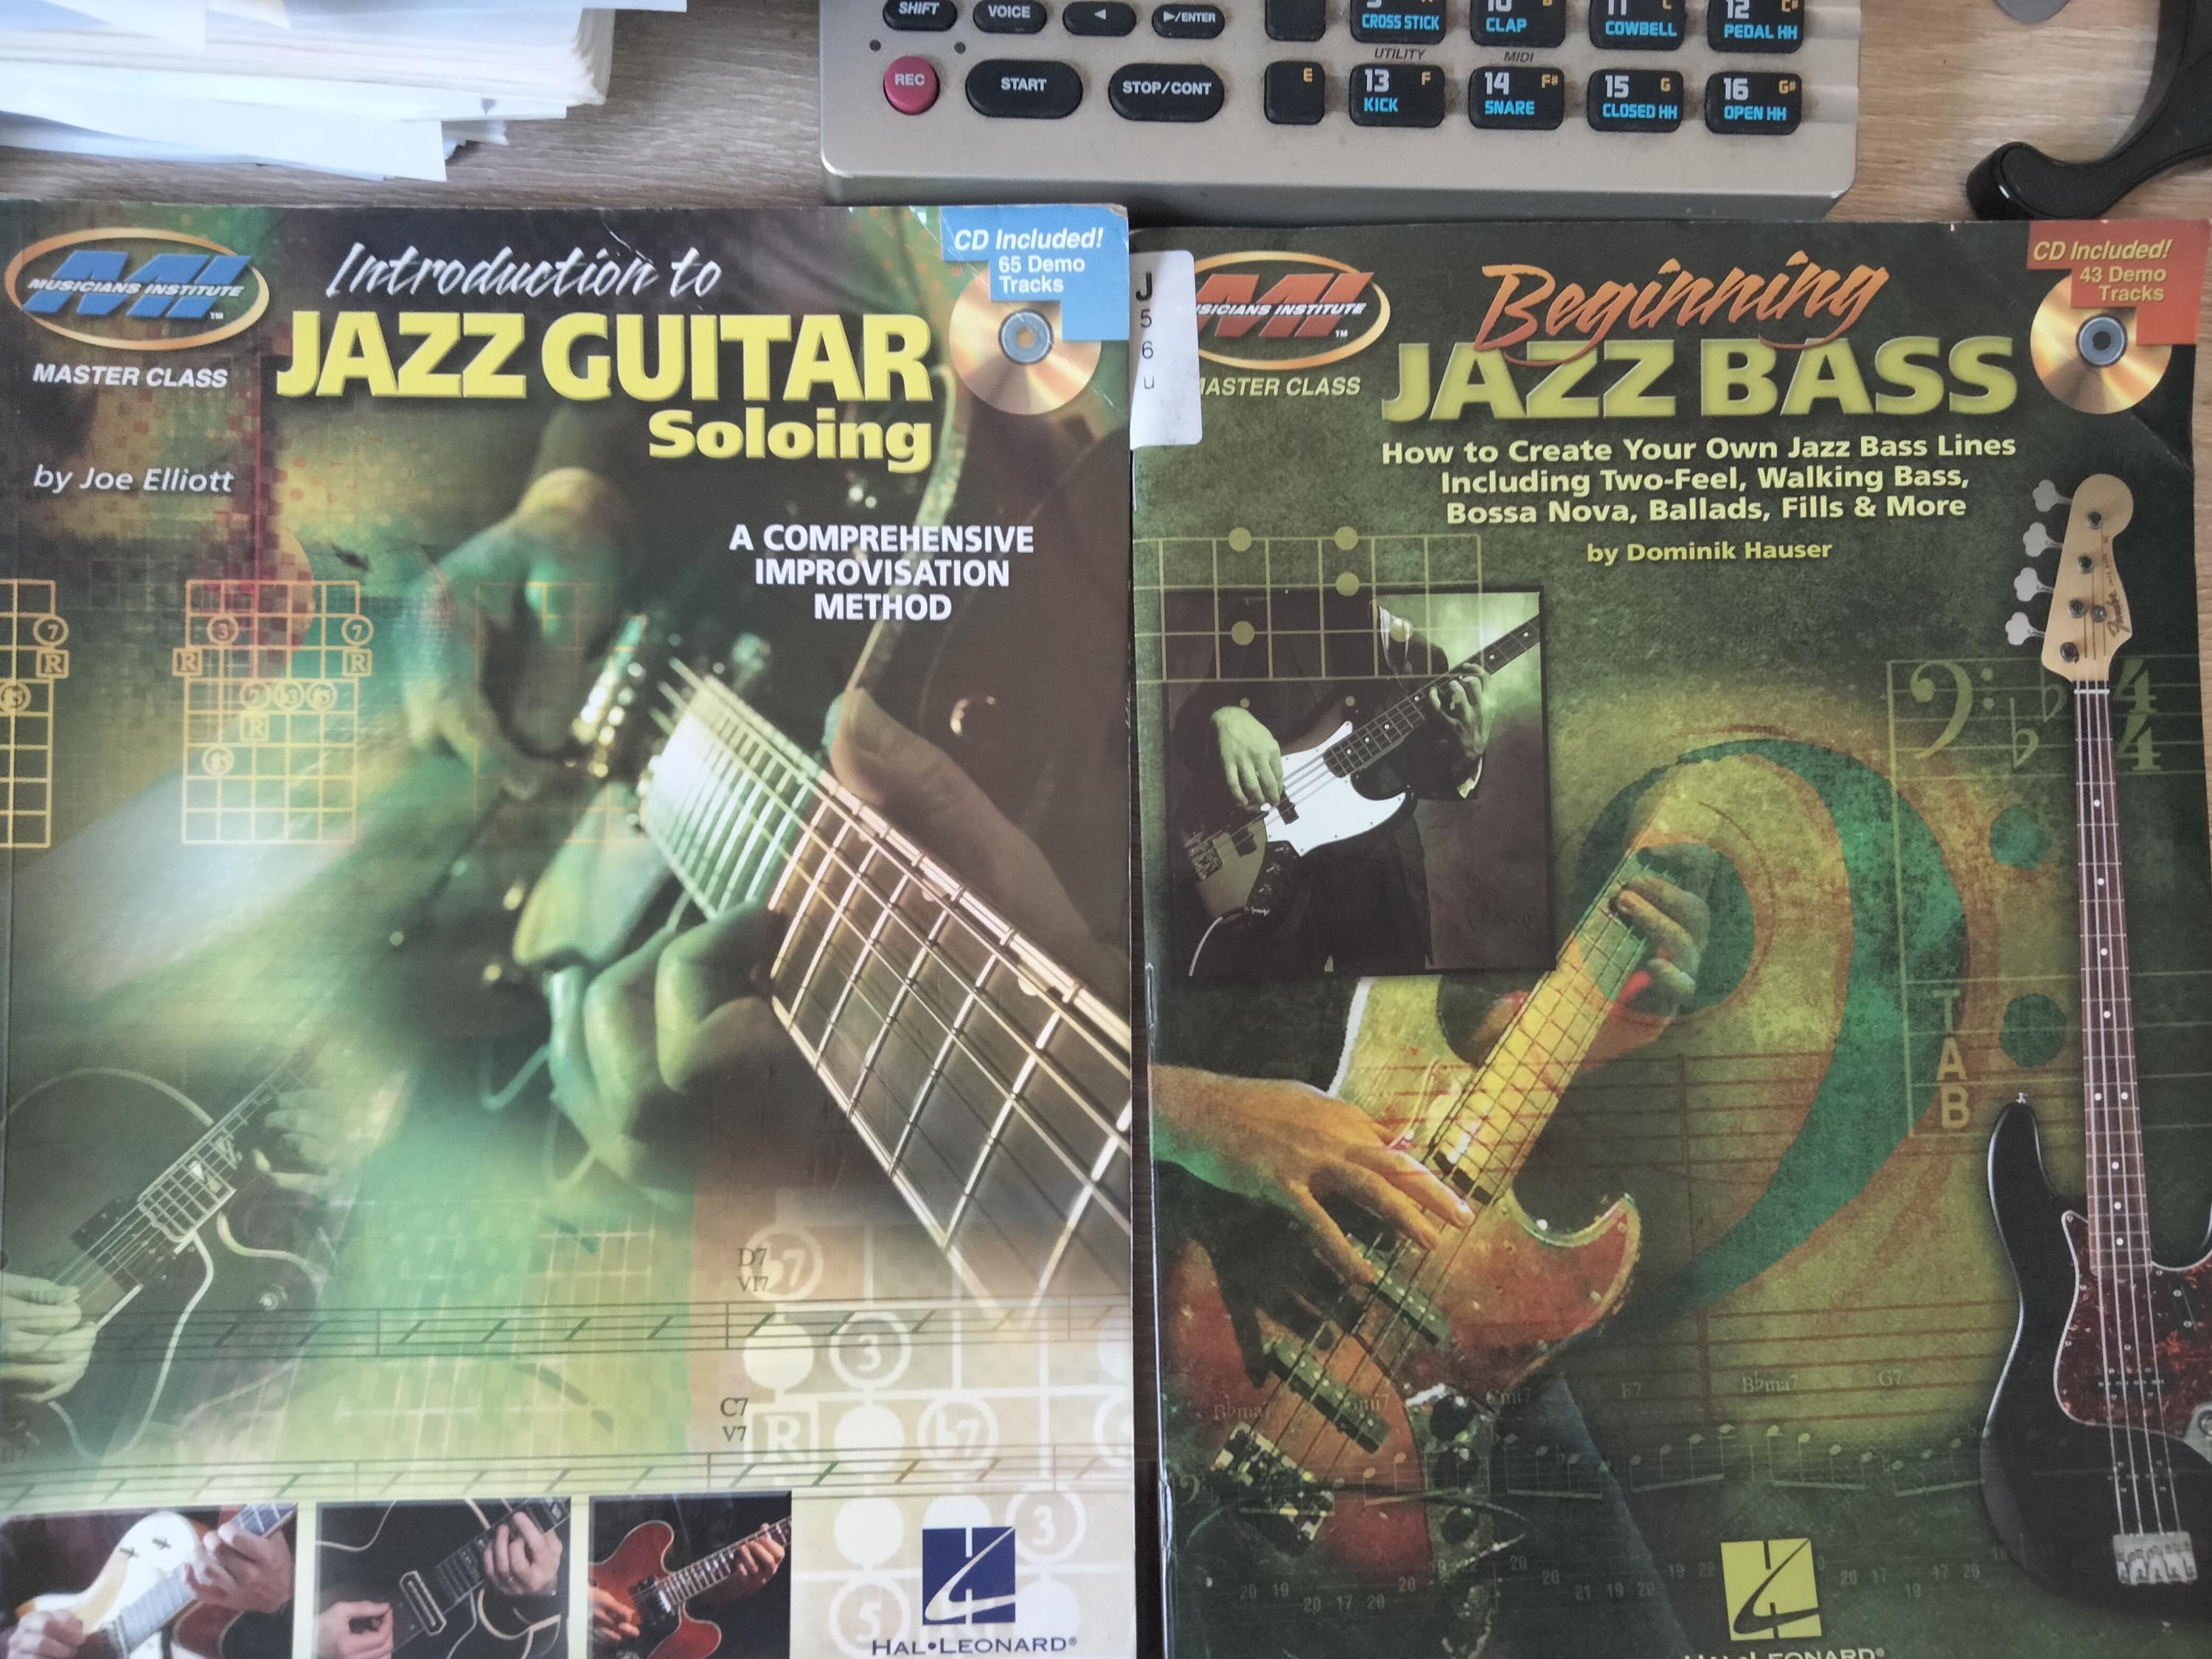 Introduction to Jazz Guitar Soloing Chapters 4, 5 and 6-img20211010125910-jpg